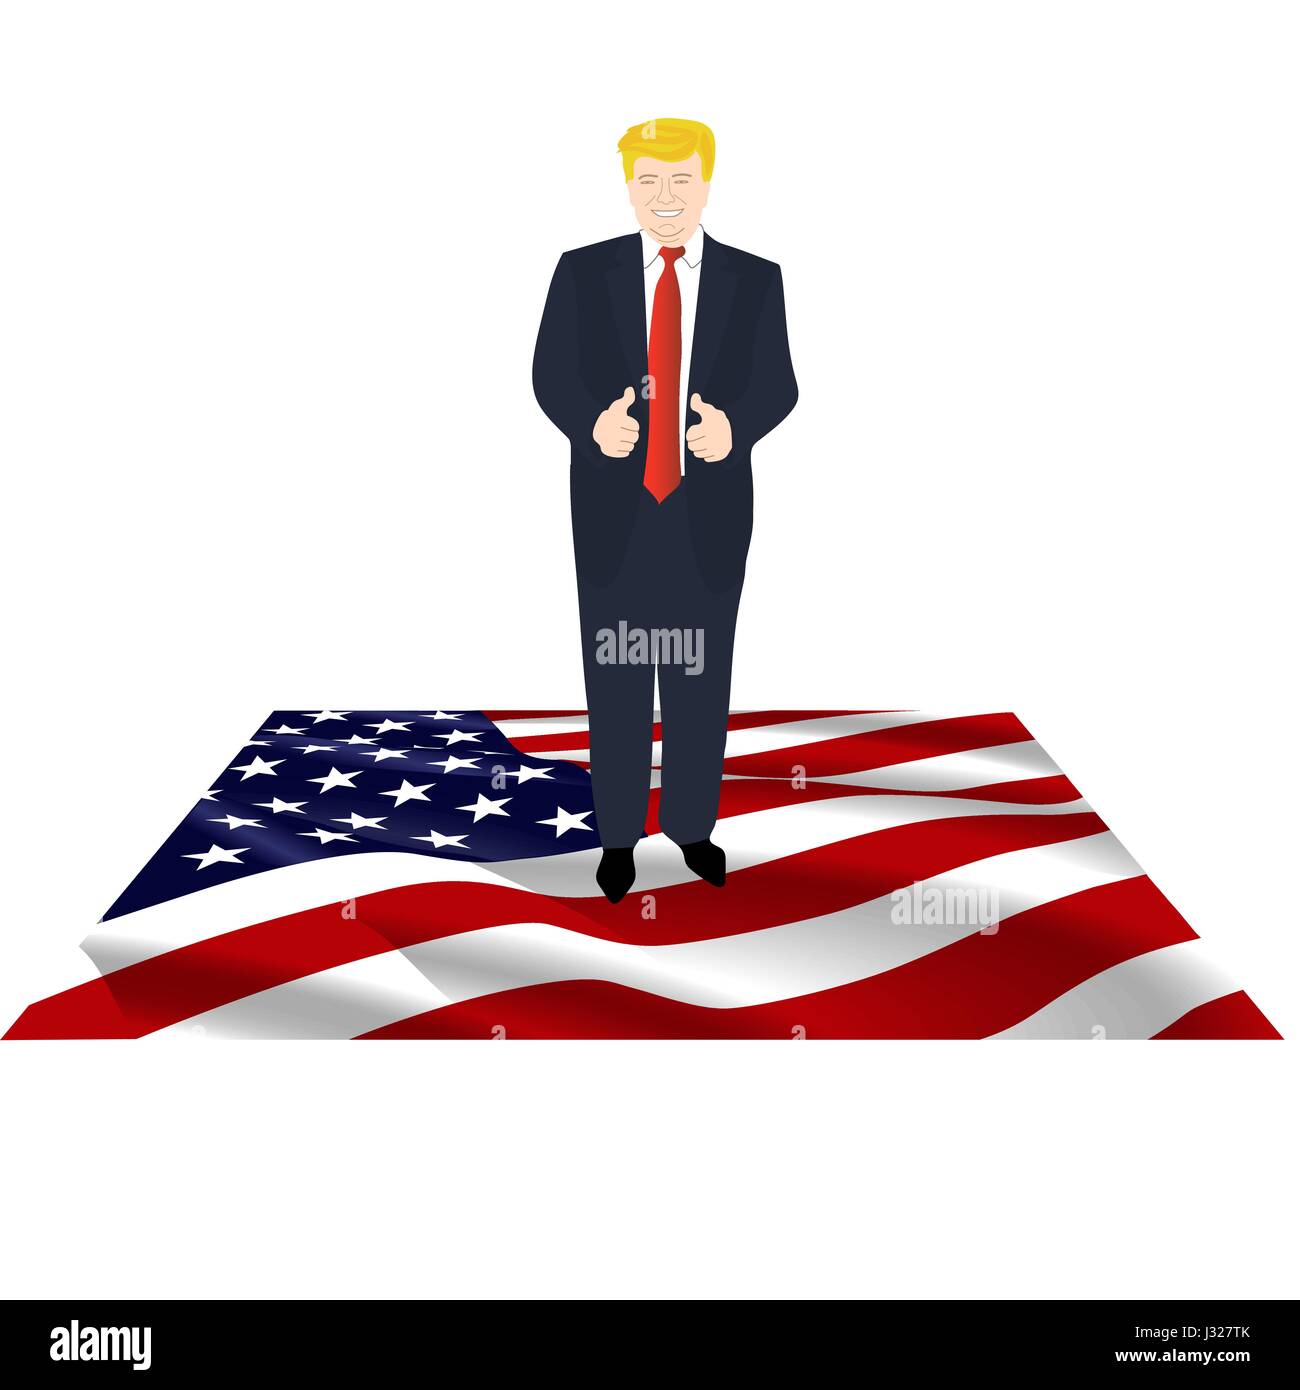 The President of America standing on a large American flag Stock Vector